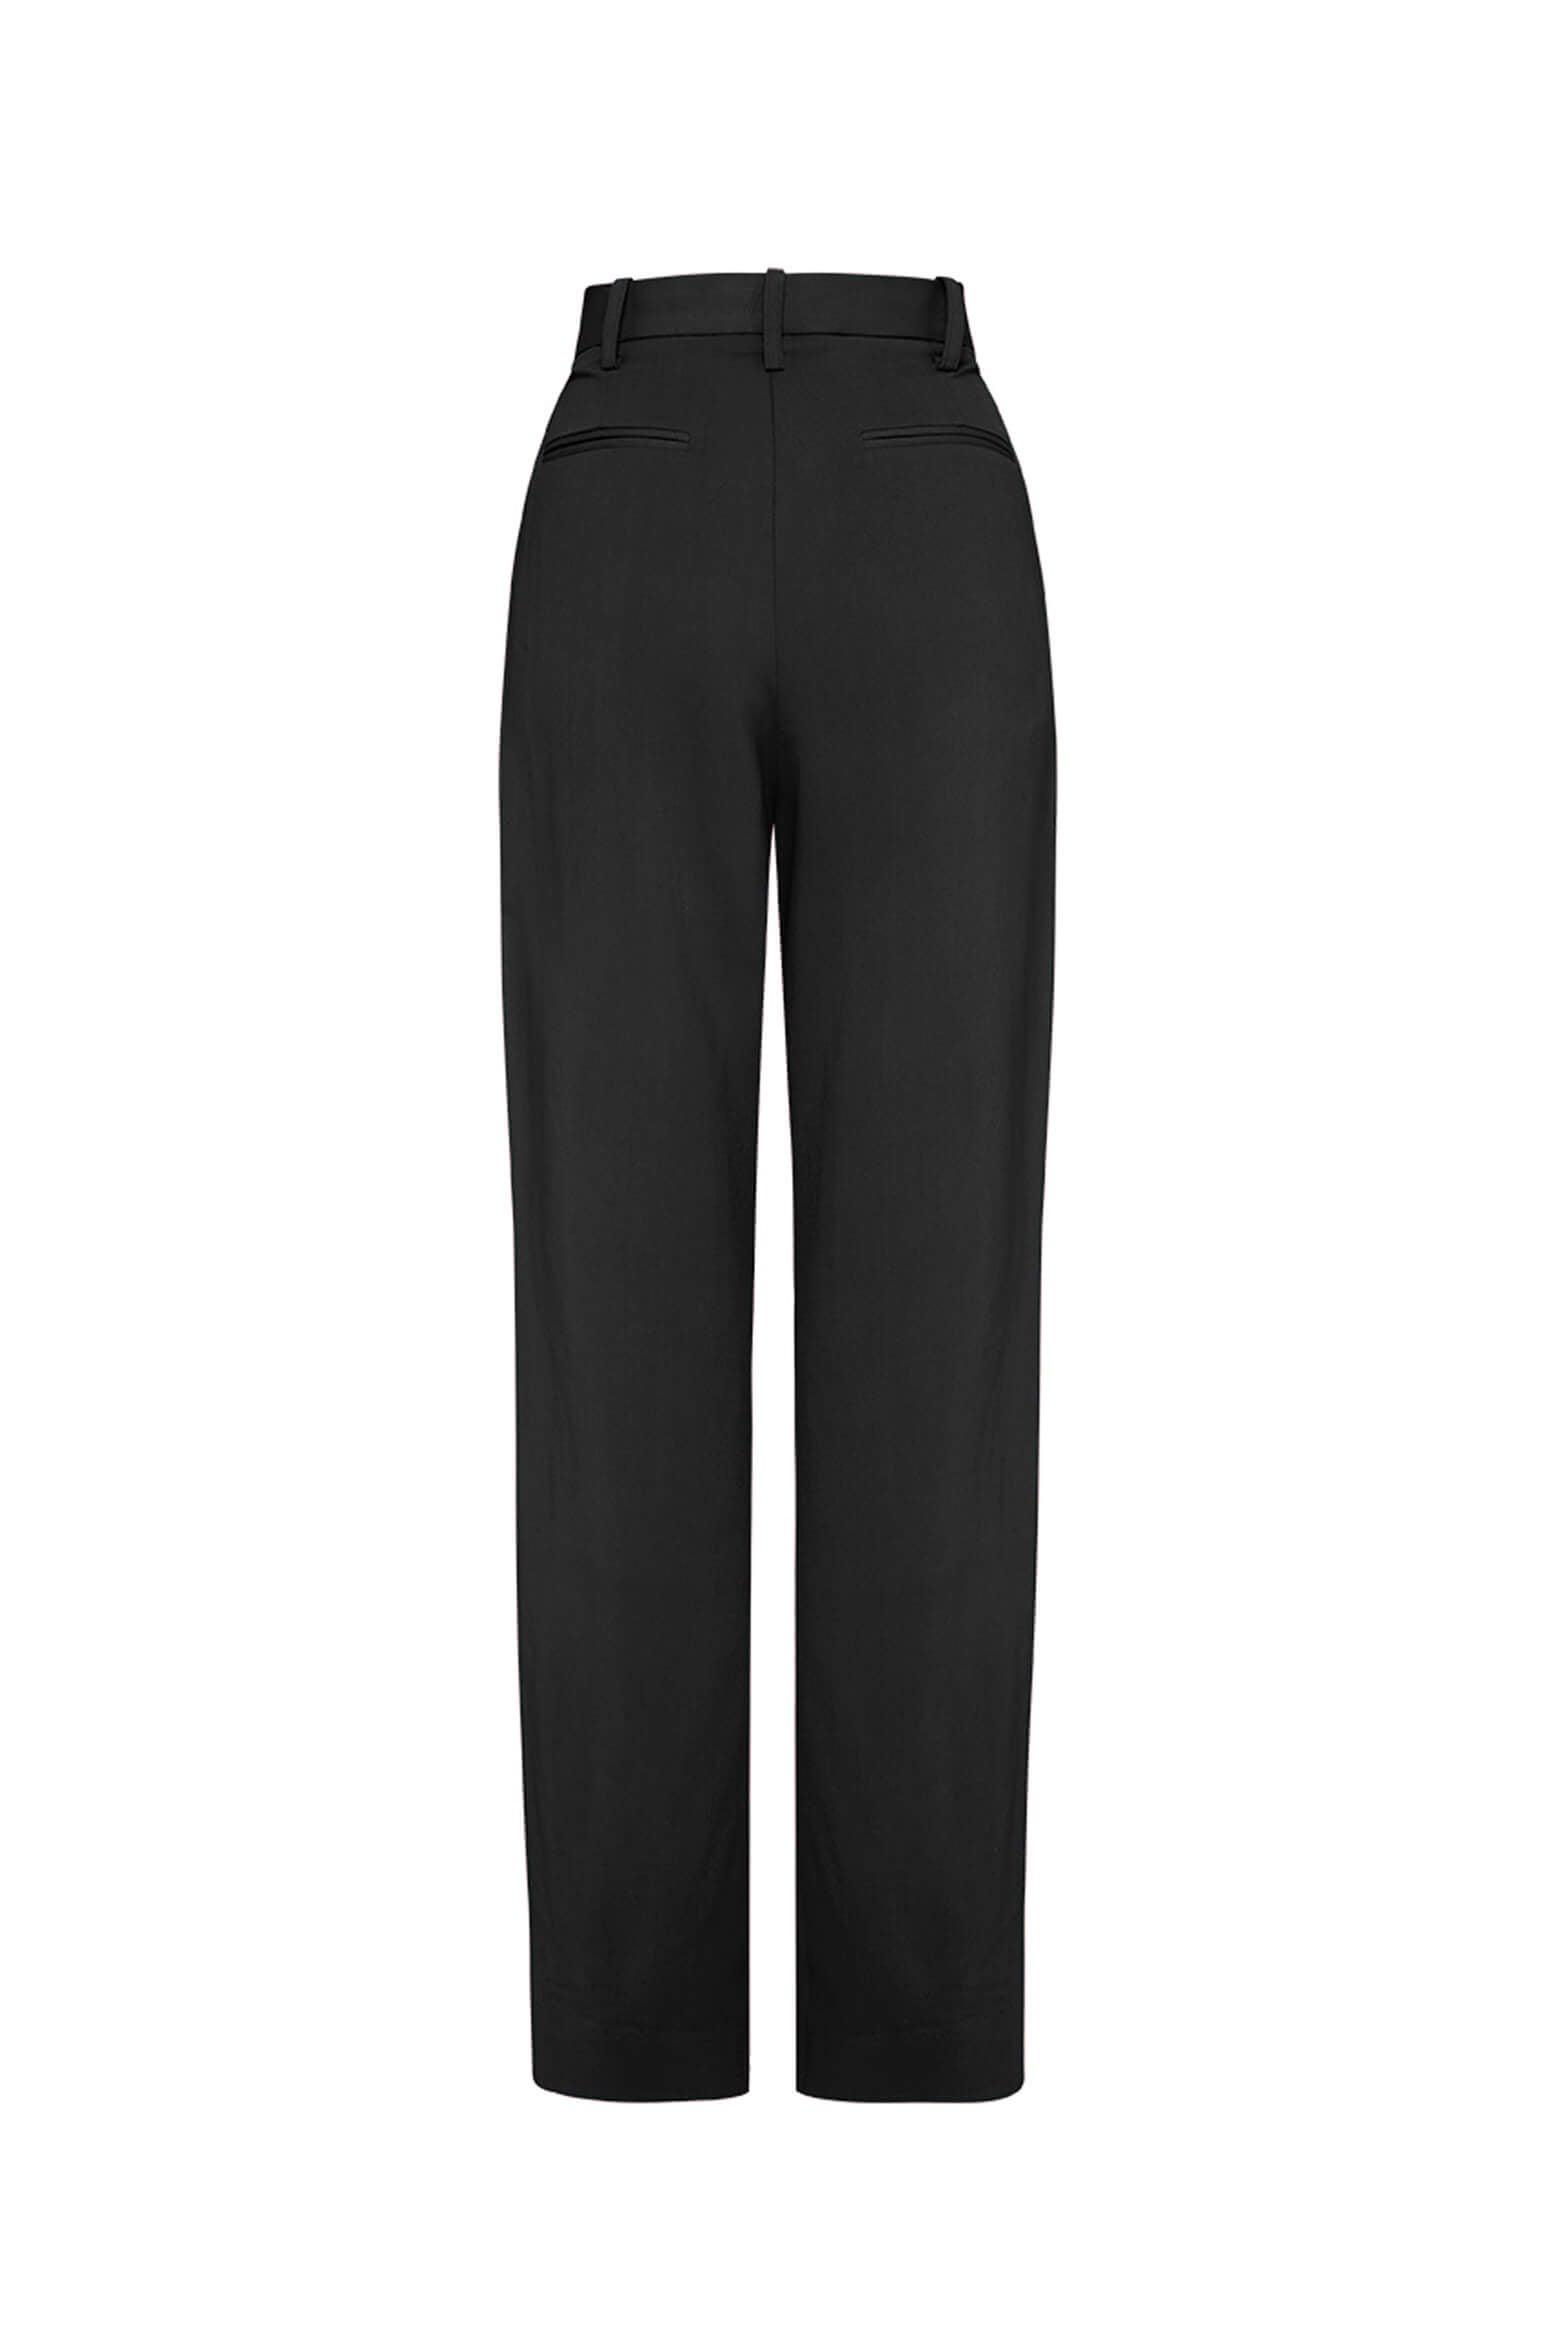 Esse Classico Trousers in Black from The New Trend